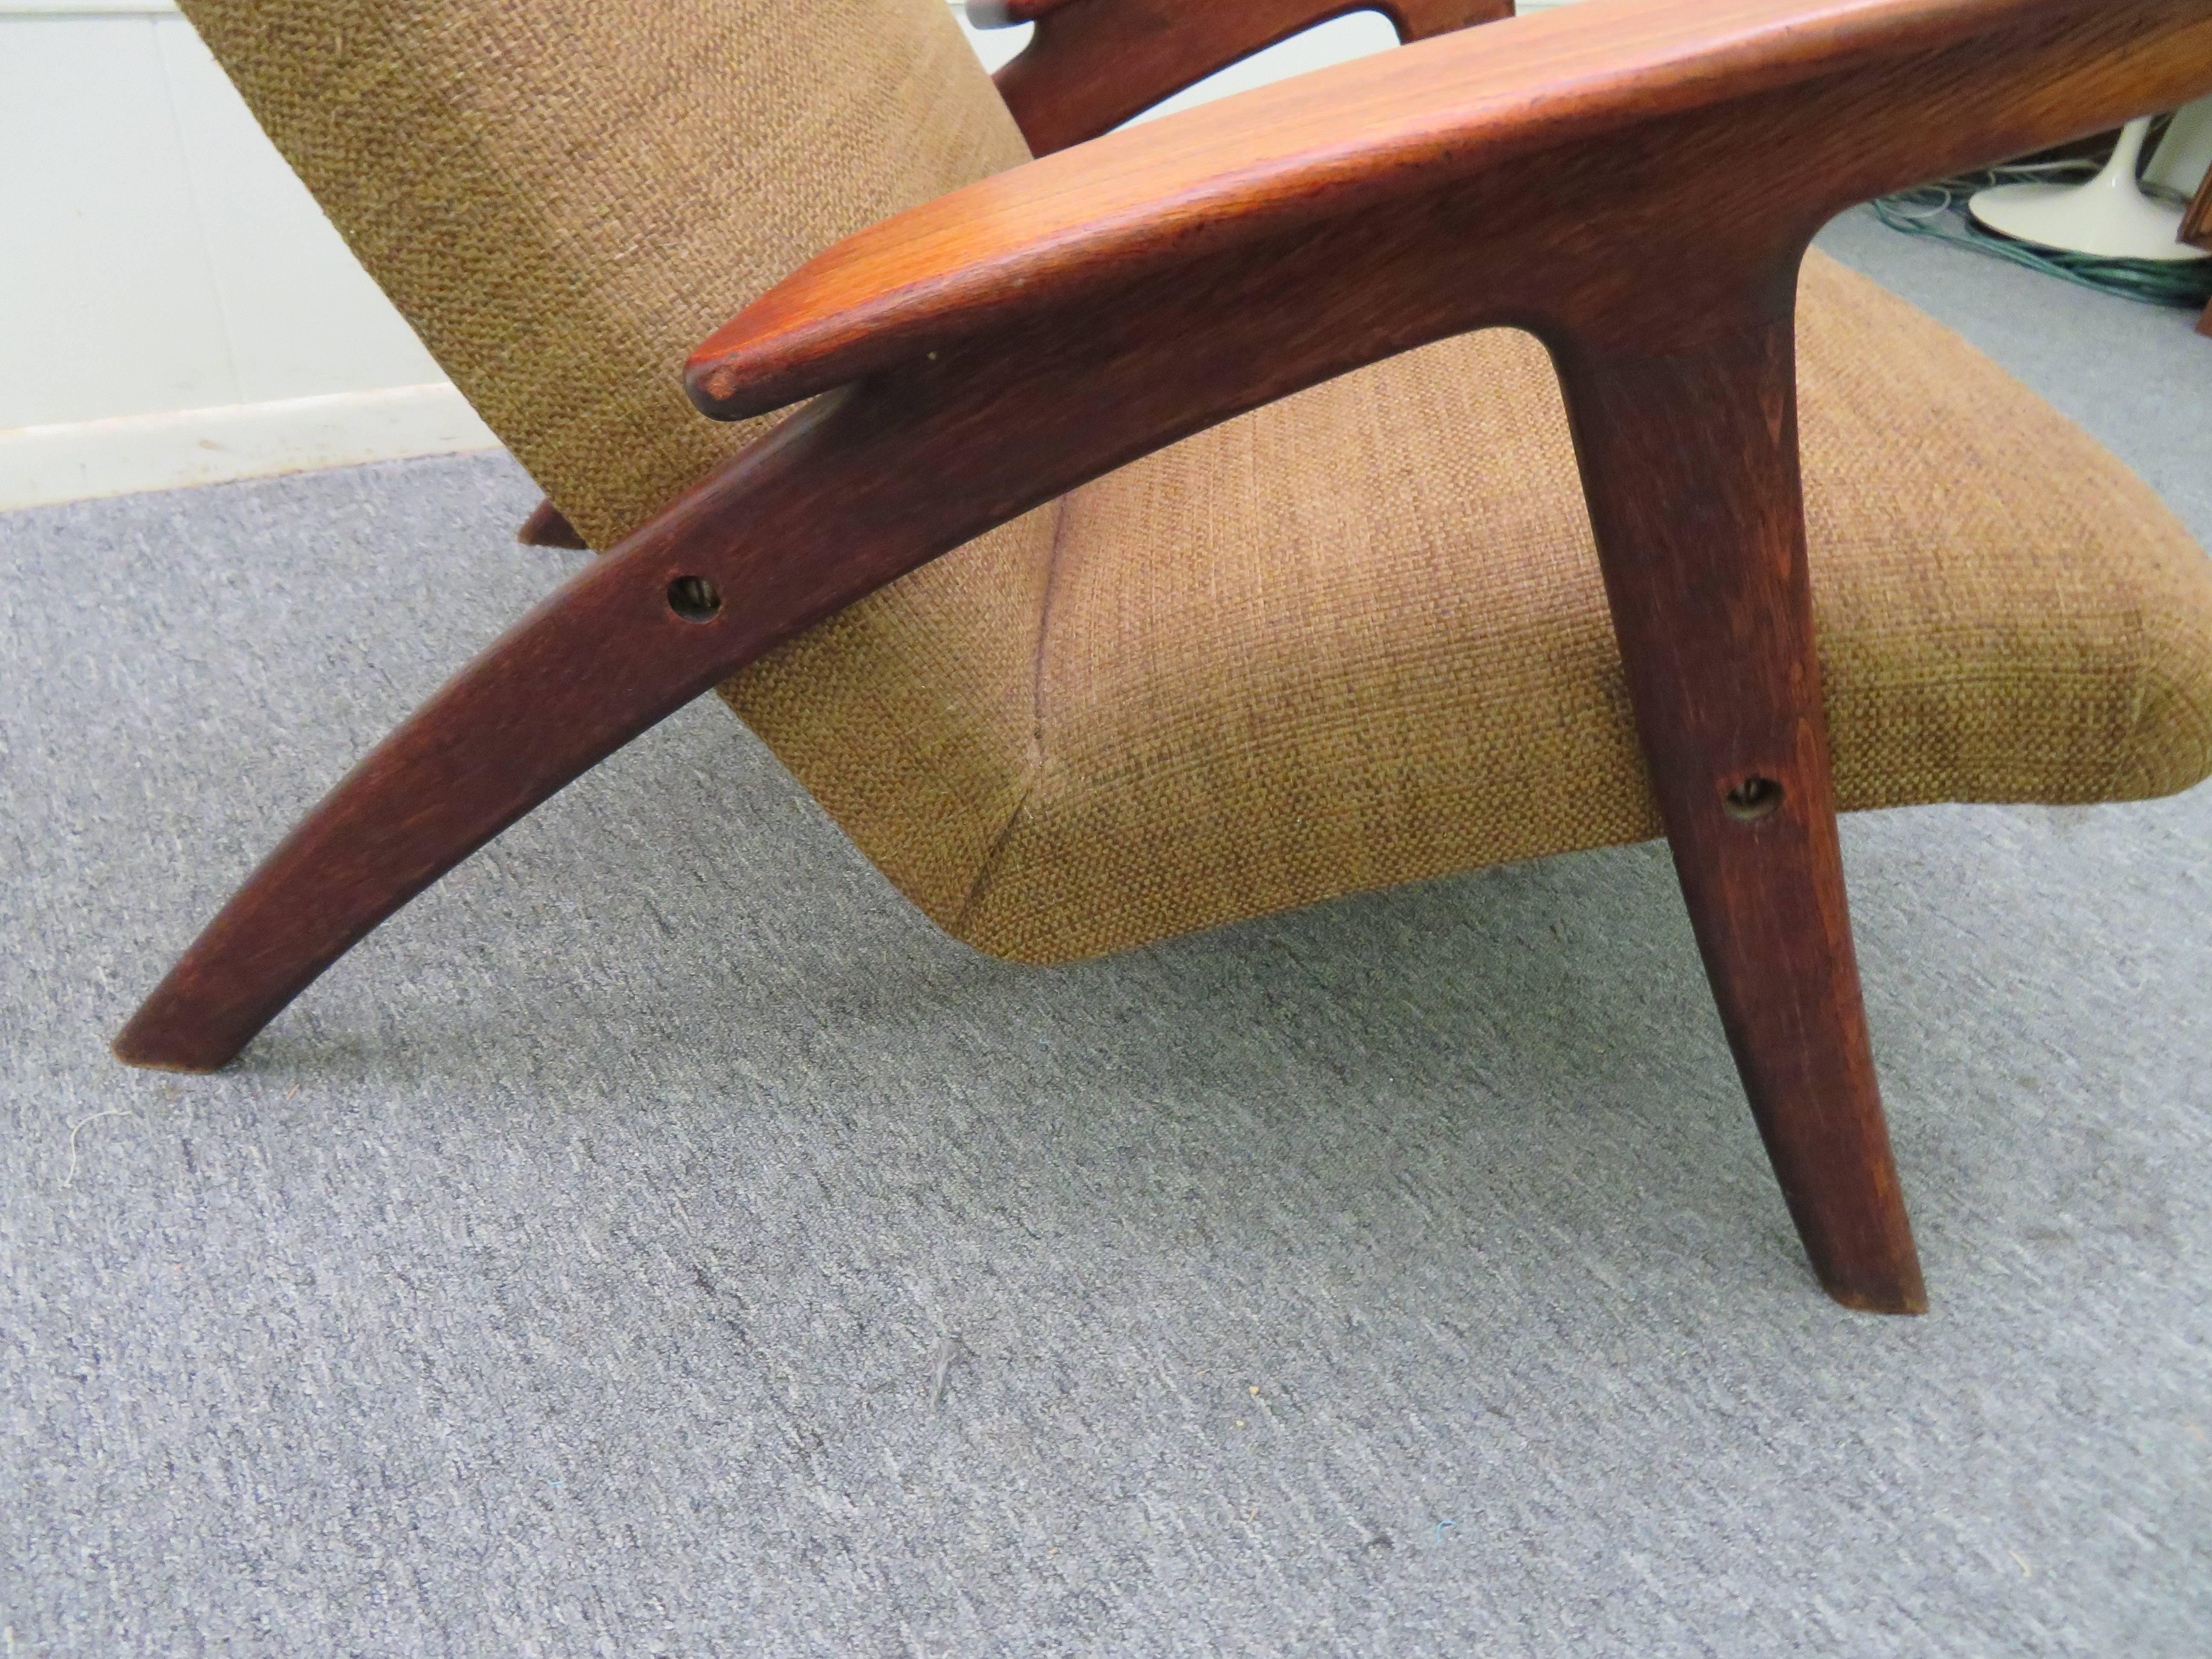 Fantastic Danish modern paddle arm teak lounge chair. This piece retains its original woven textured fabric-a bit dated but still nice. The teak frame has a warm honey brown patina and has great vintage appeal.